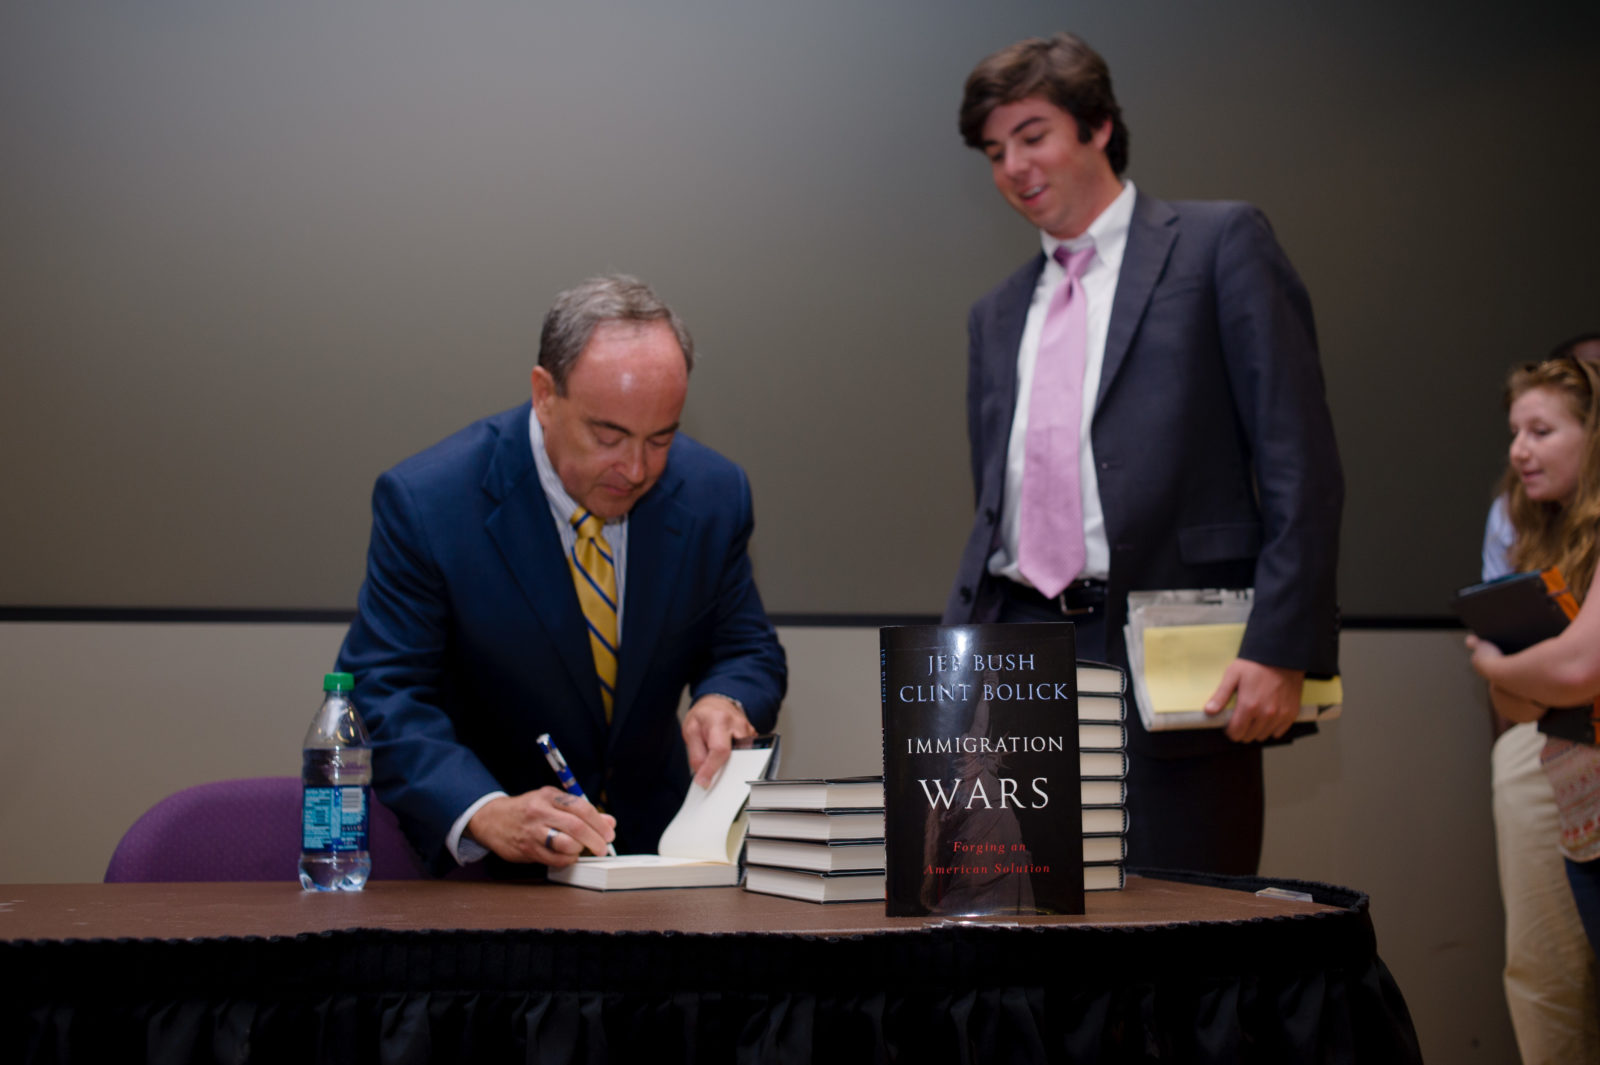 TFAS Alumnus Clint Bolick (ICPES 78) meets with TFAS students and signs copies of his new book, “Immigration Wars: Forging an American Solution.” Bolick was one of many TFAS alumni to volunteer their time and expertise to students this summer. Watch for an upcoming newsletter featuring all of our 2013 TFAS Alumni Volunteers. 